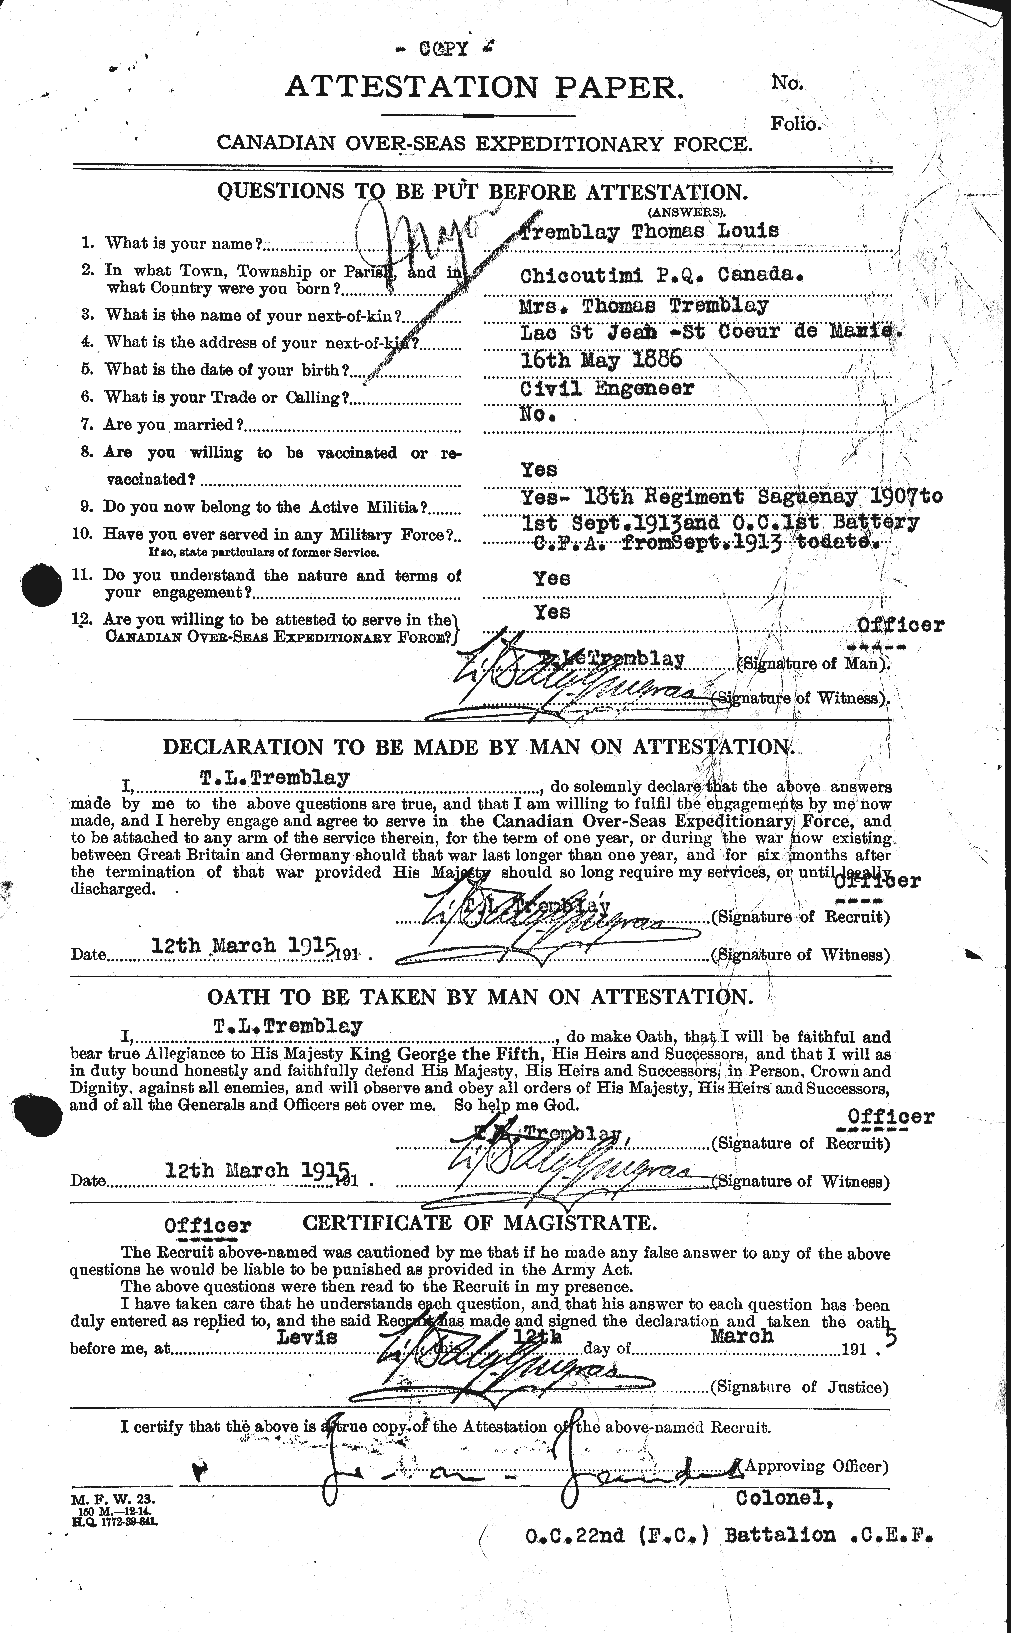 Personnel Records of the First World War - CEF 200678a